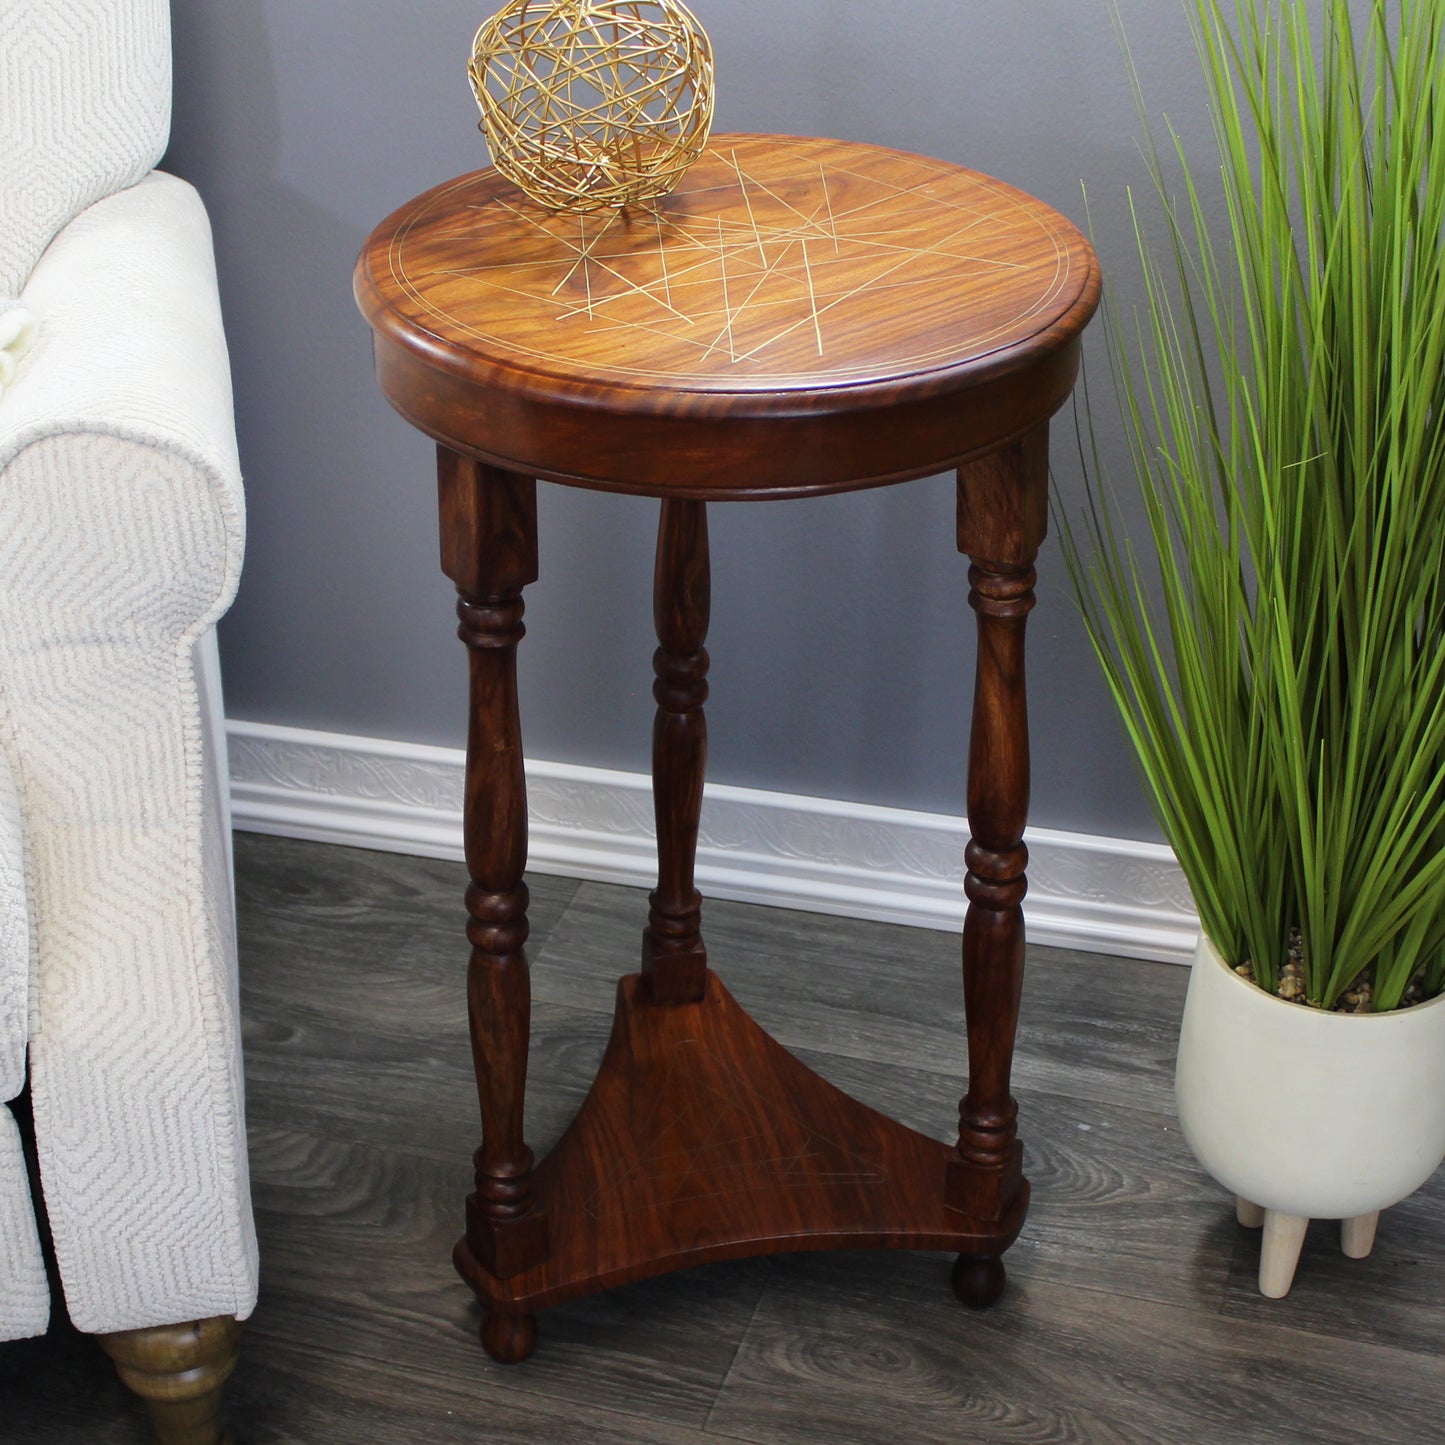 Natural Geo Rosewood Round Wooden Accent Table - Abstract Golden Brass Inlay